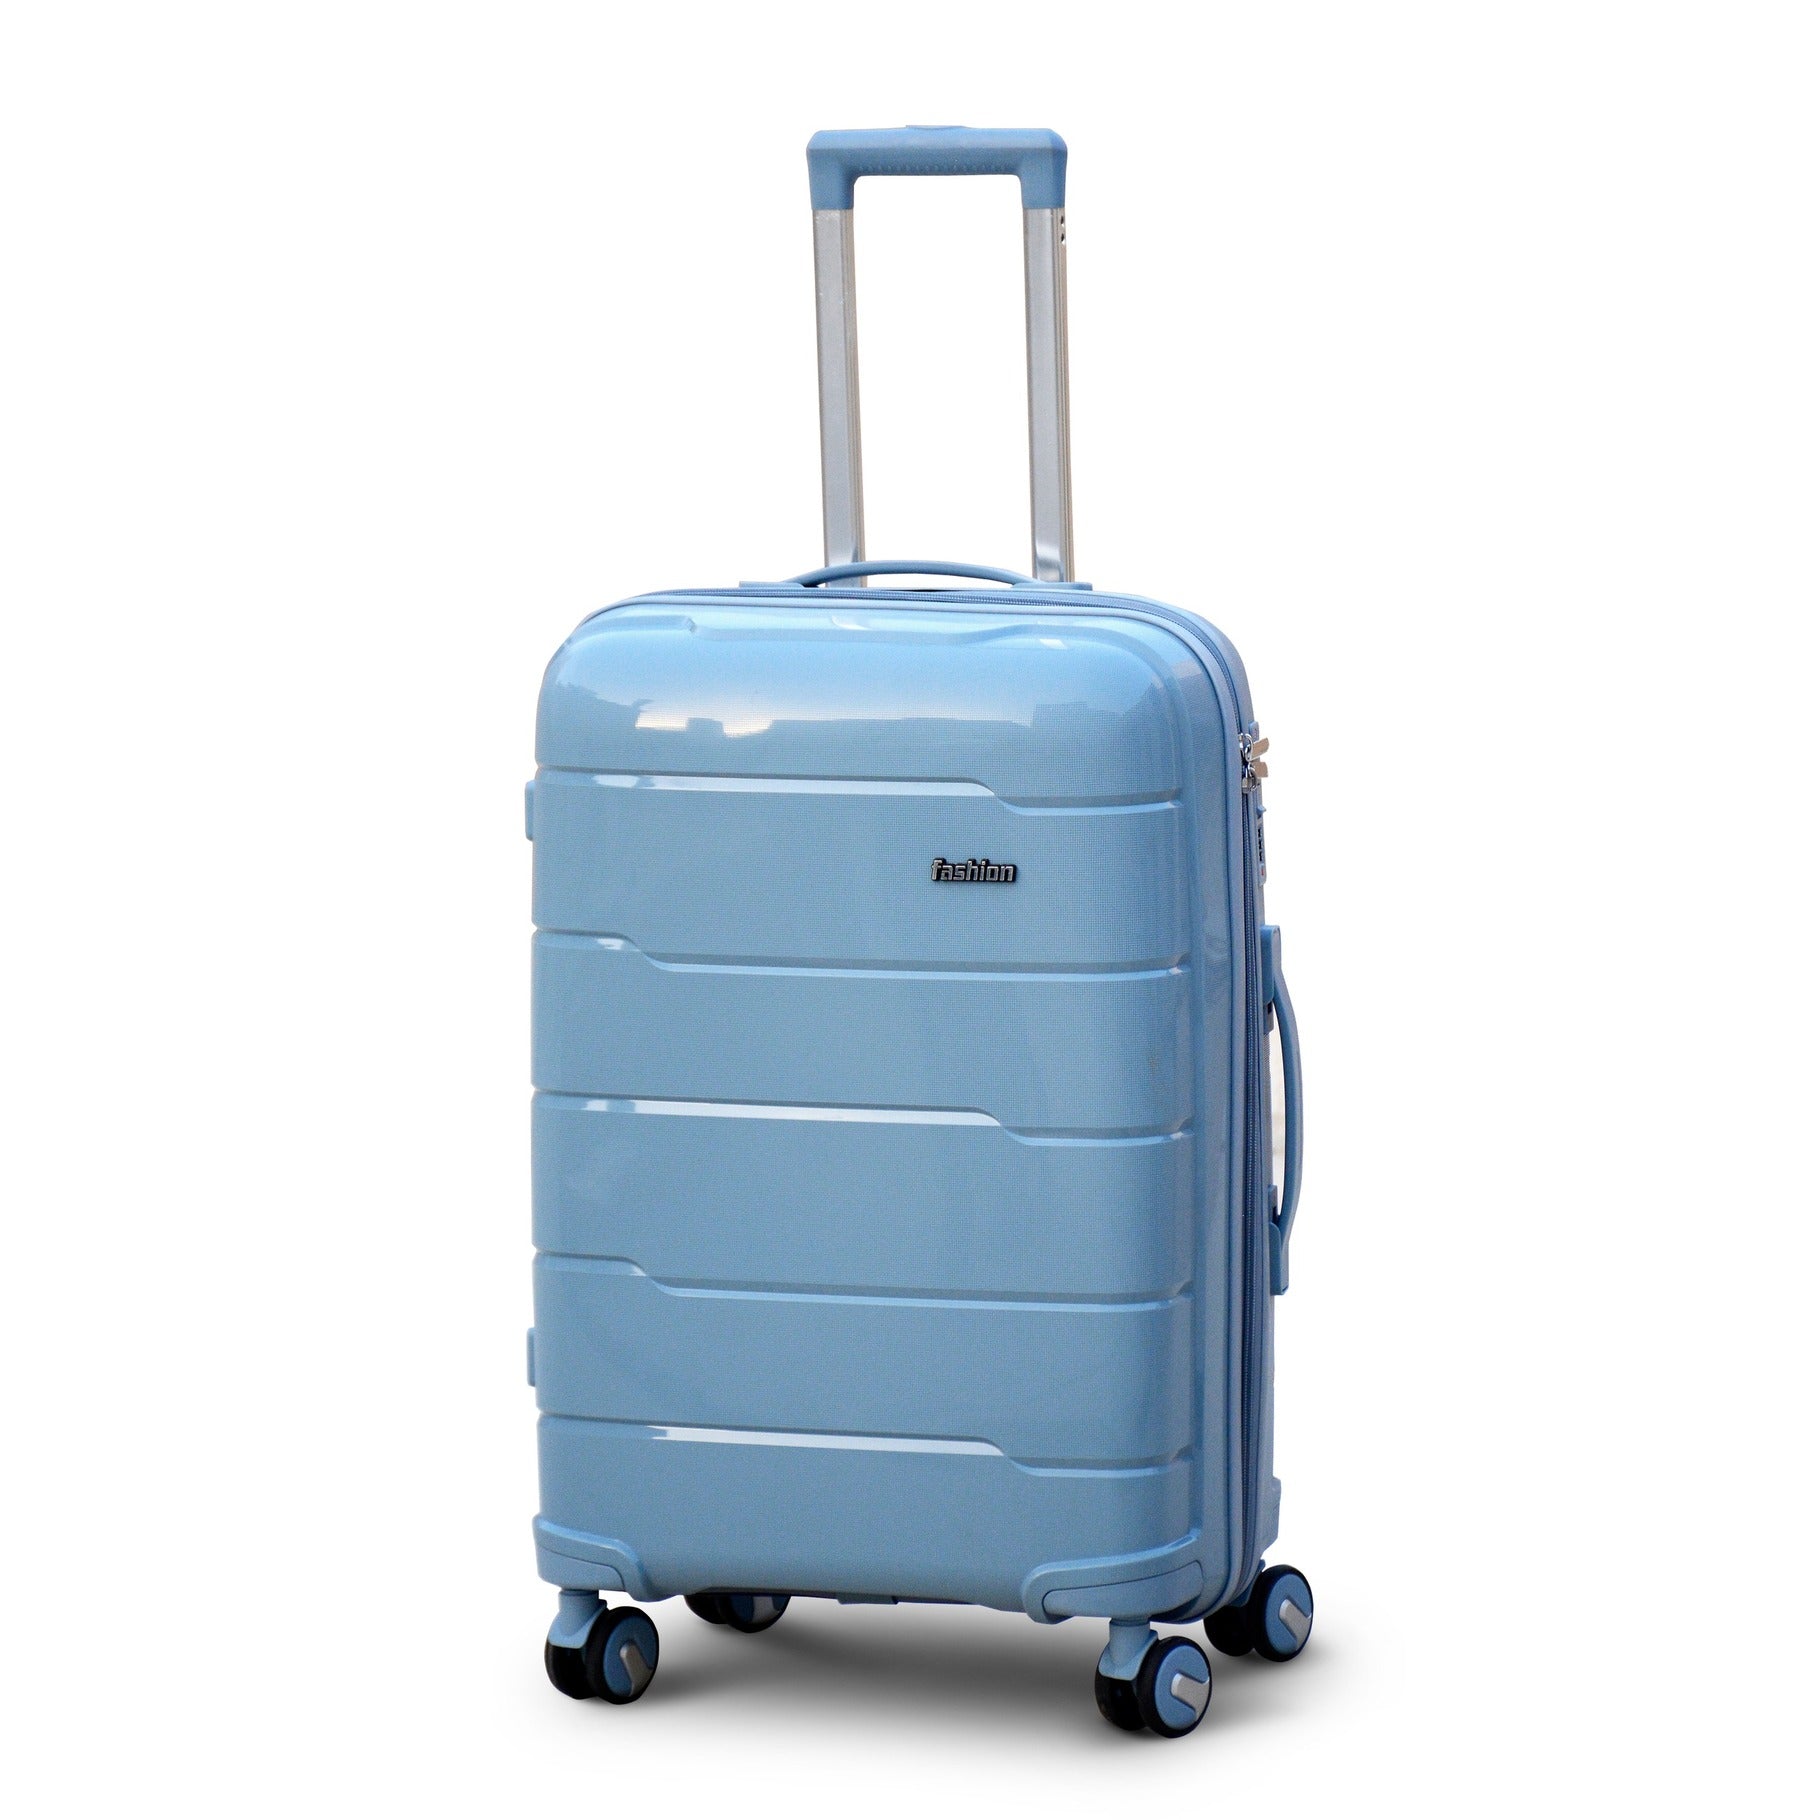 28" Grey Colour Non Expandable Ceramic PP Luggage Lightweight Hard Case Trolley Bag with Double Spinner Wheel